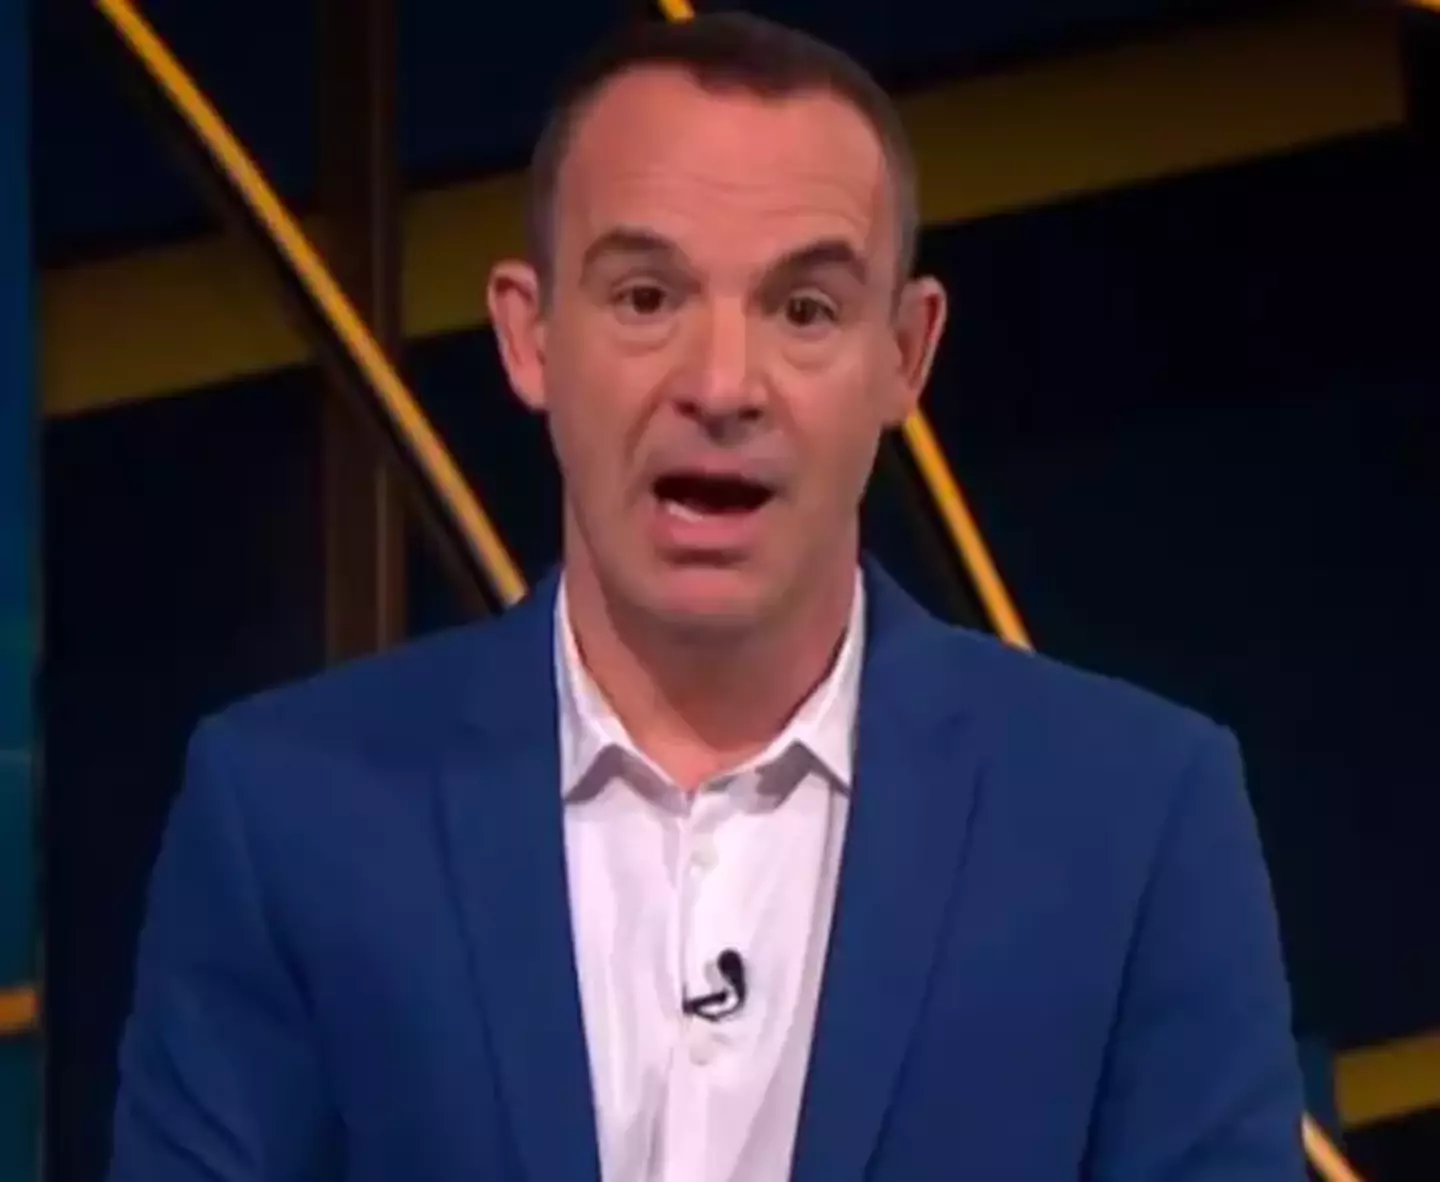 Martin Lewis wants you to know how much your Christmas lights are costing you.